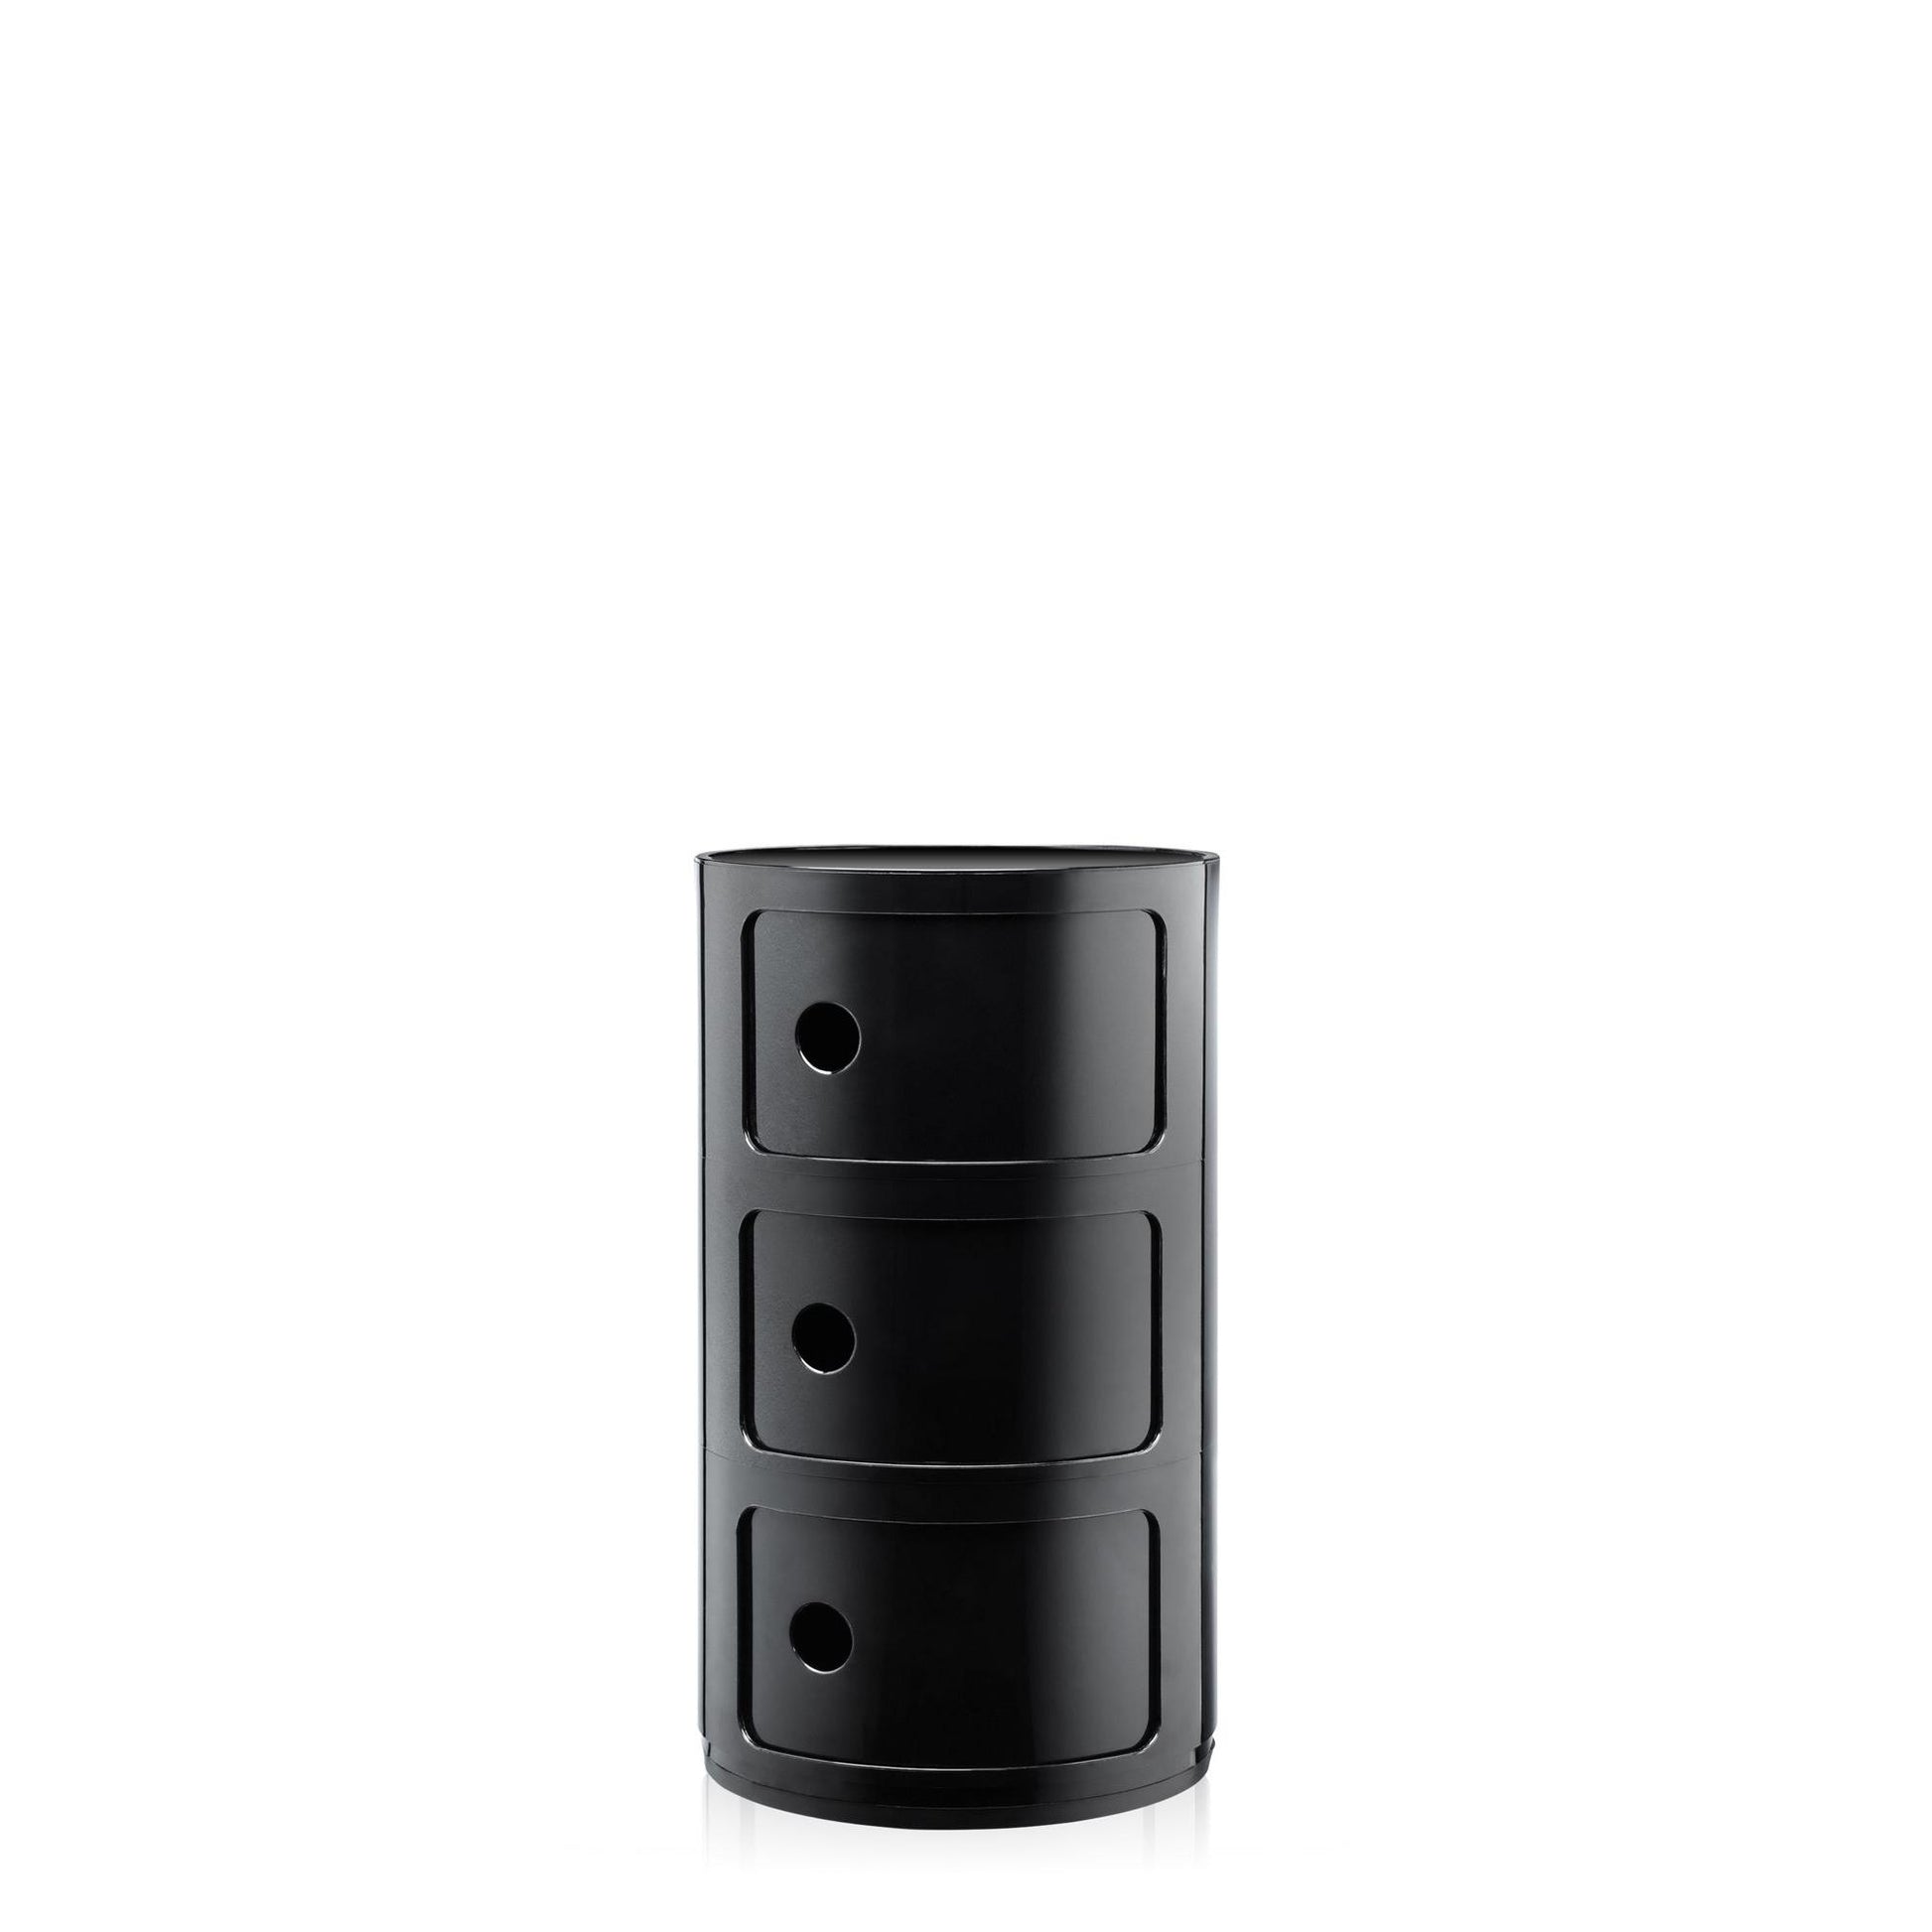 Componibili 3 Cabinet by Kartell #Black